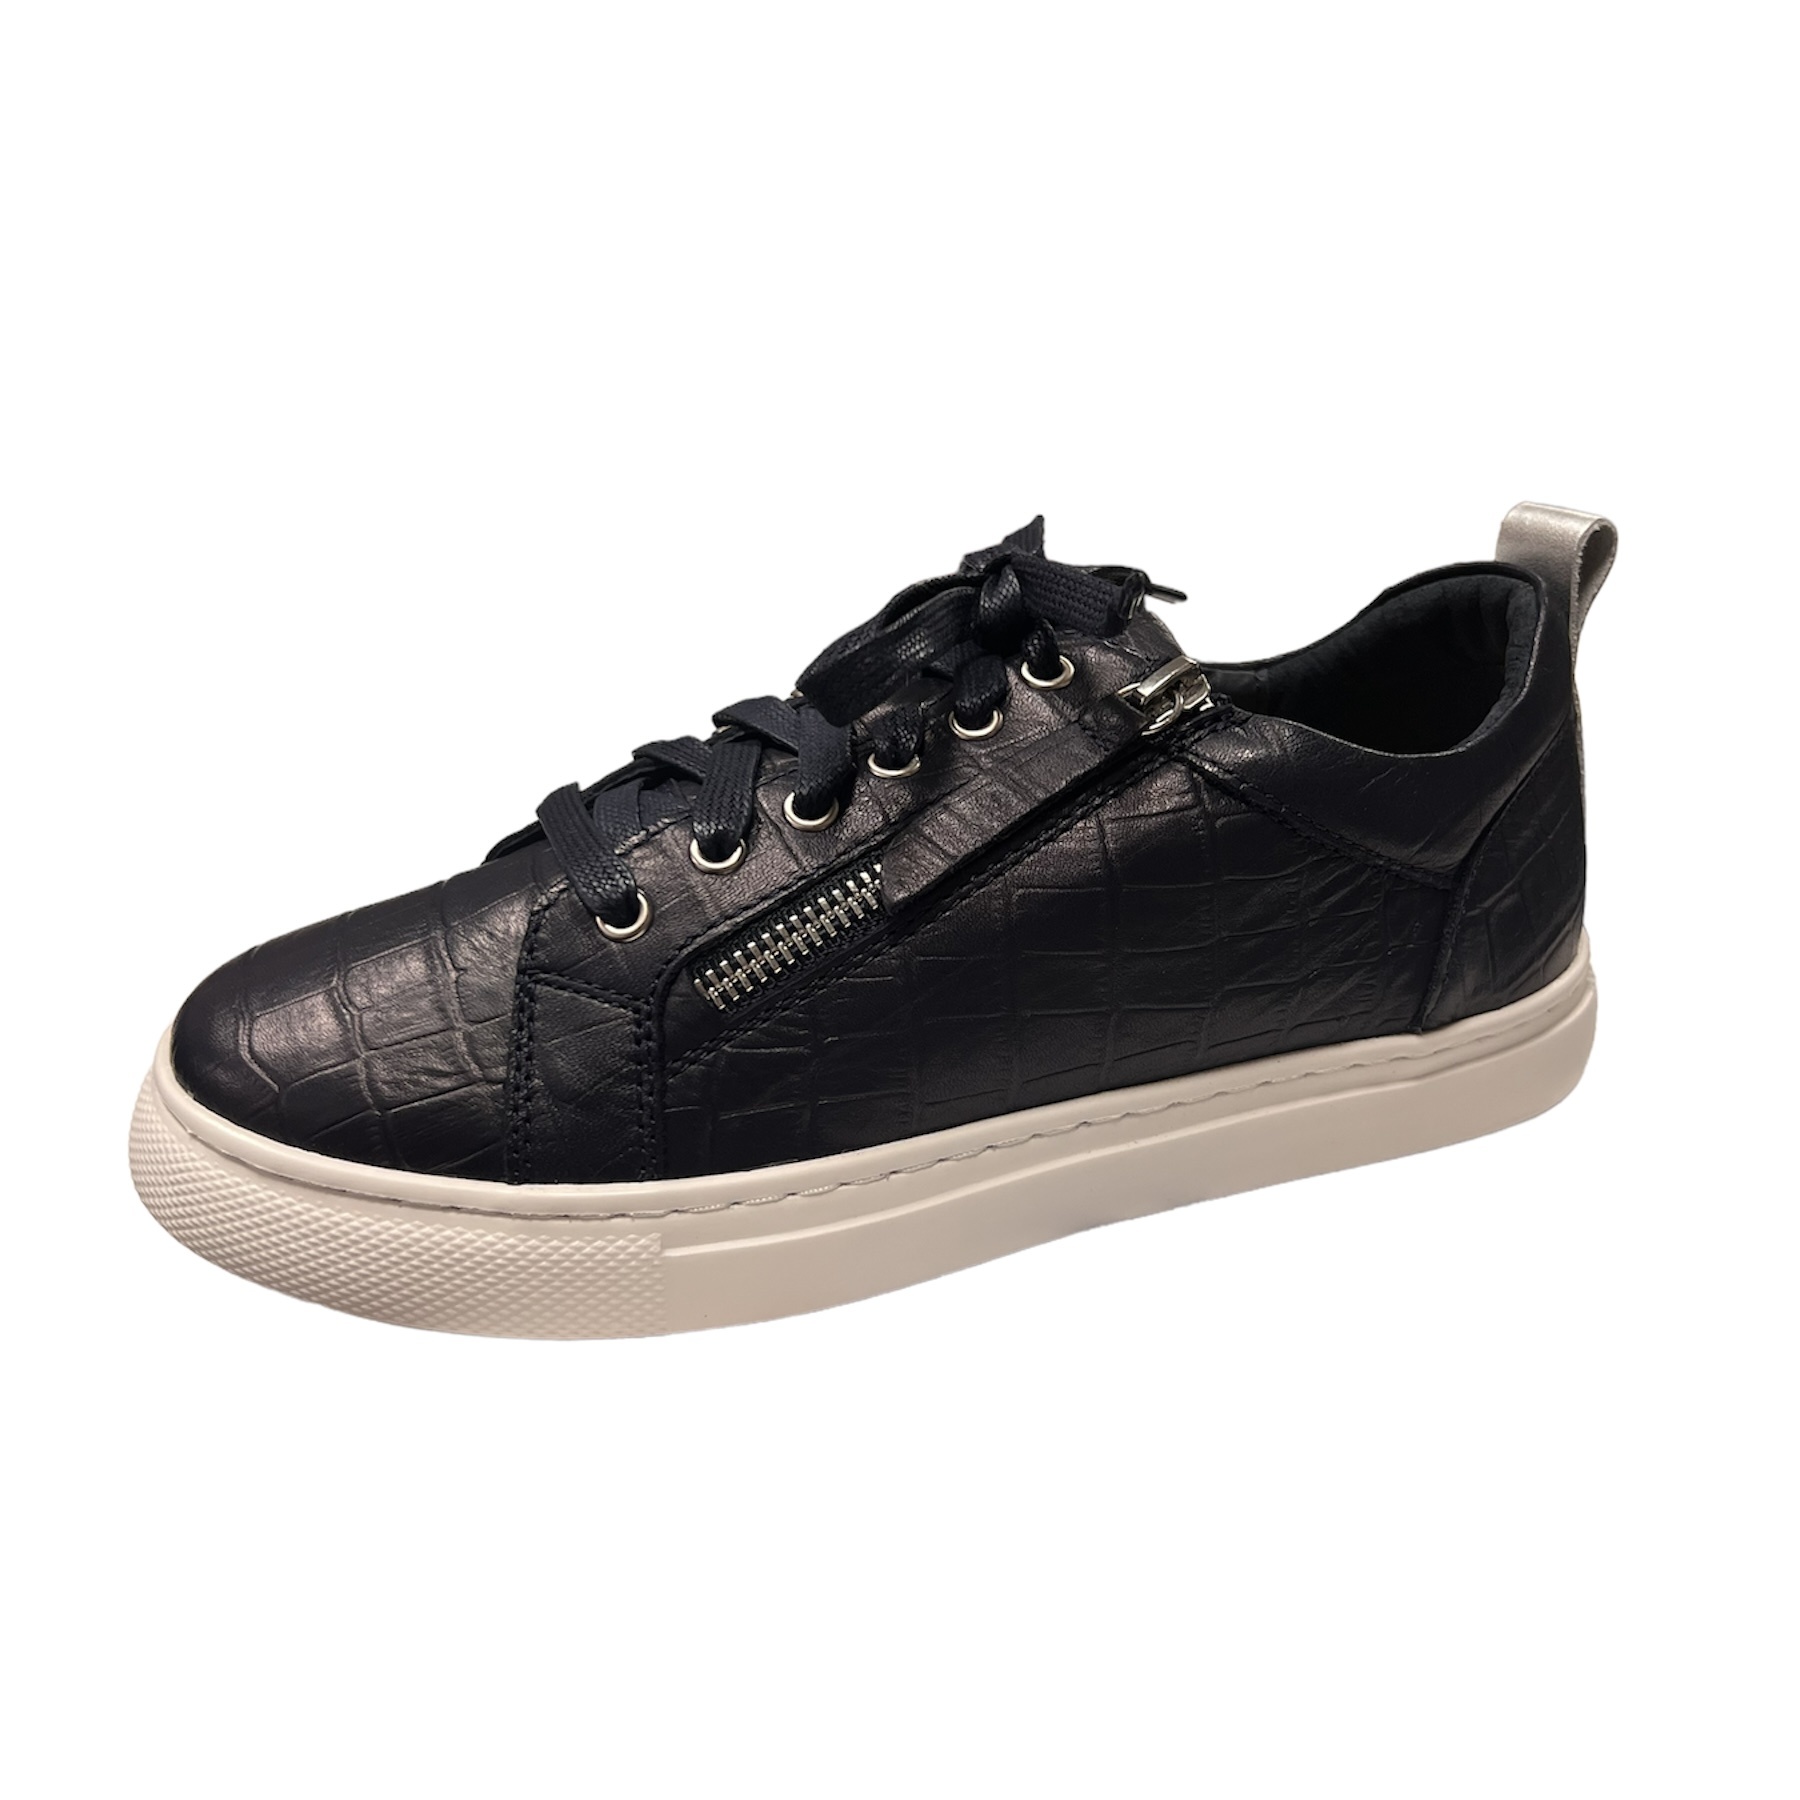 Navy Alligator Leather Sneakers